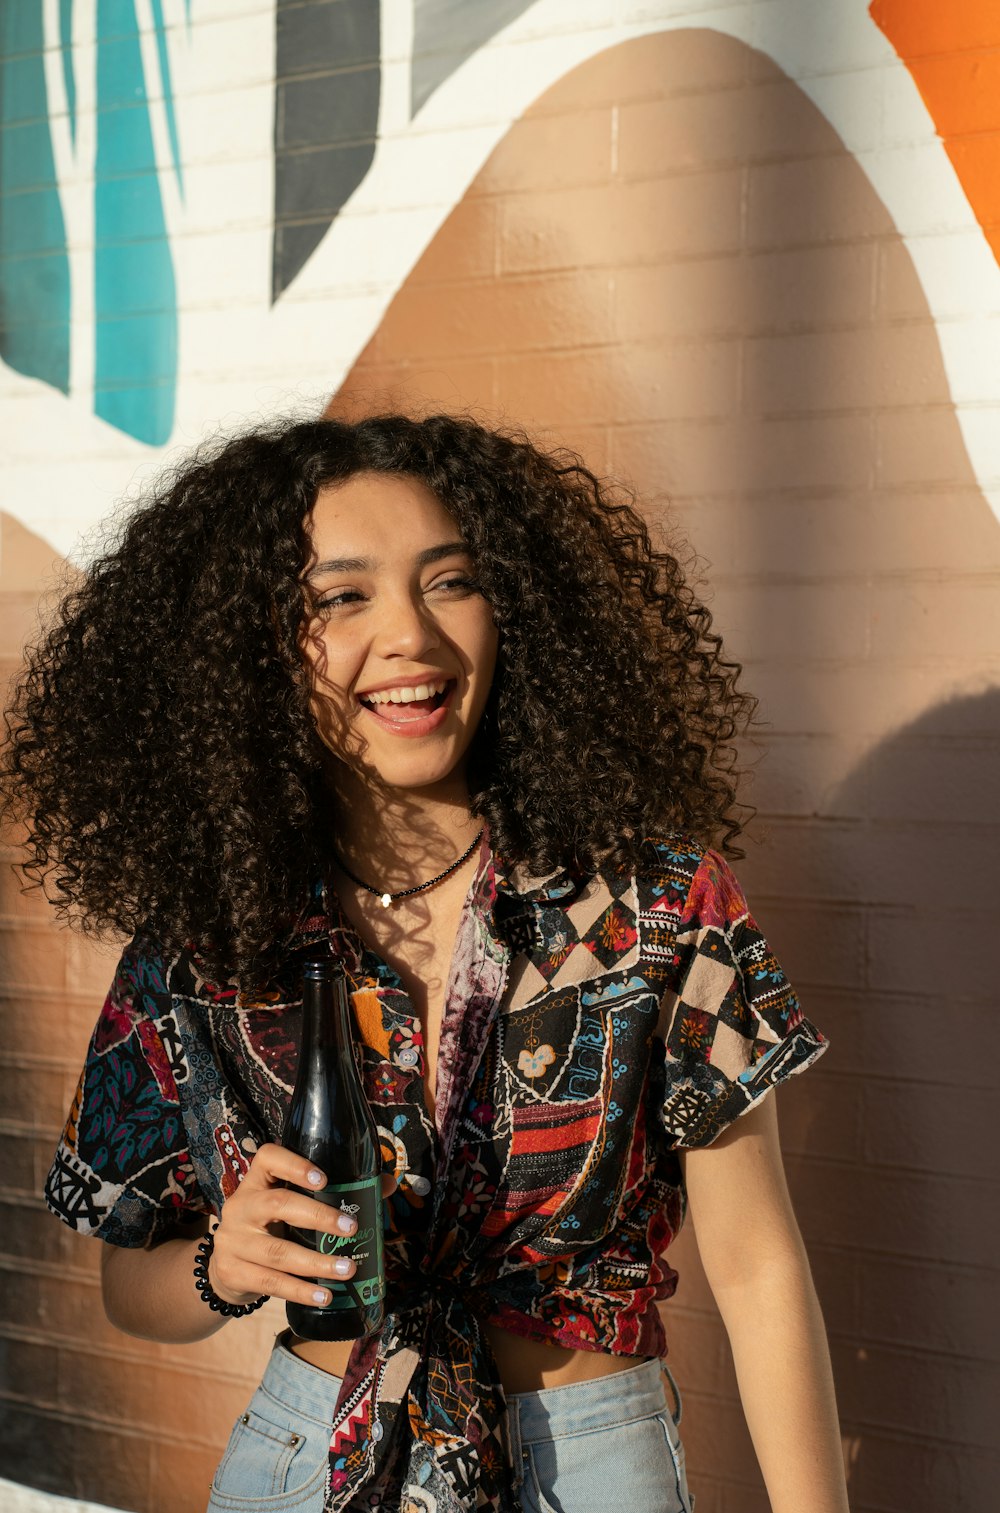 a woman with curly hair holding a bottle of beer